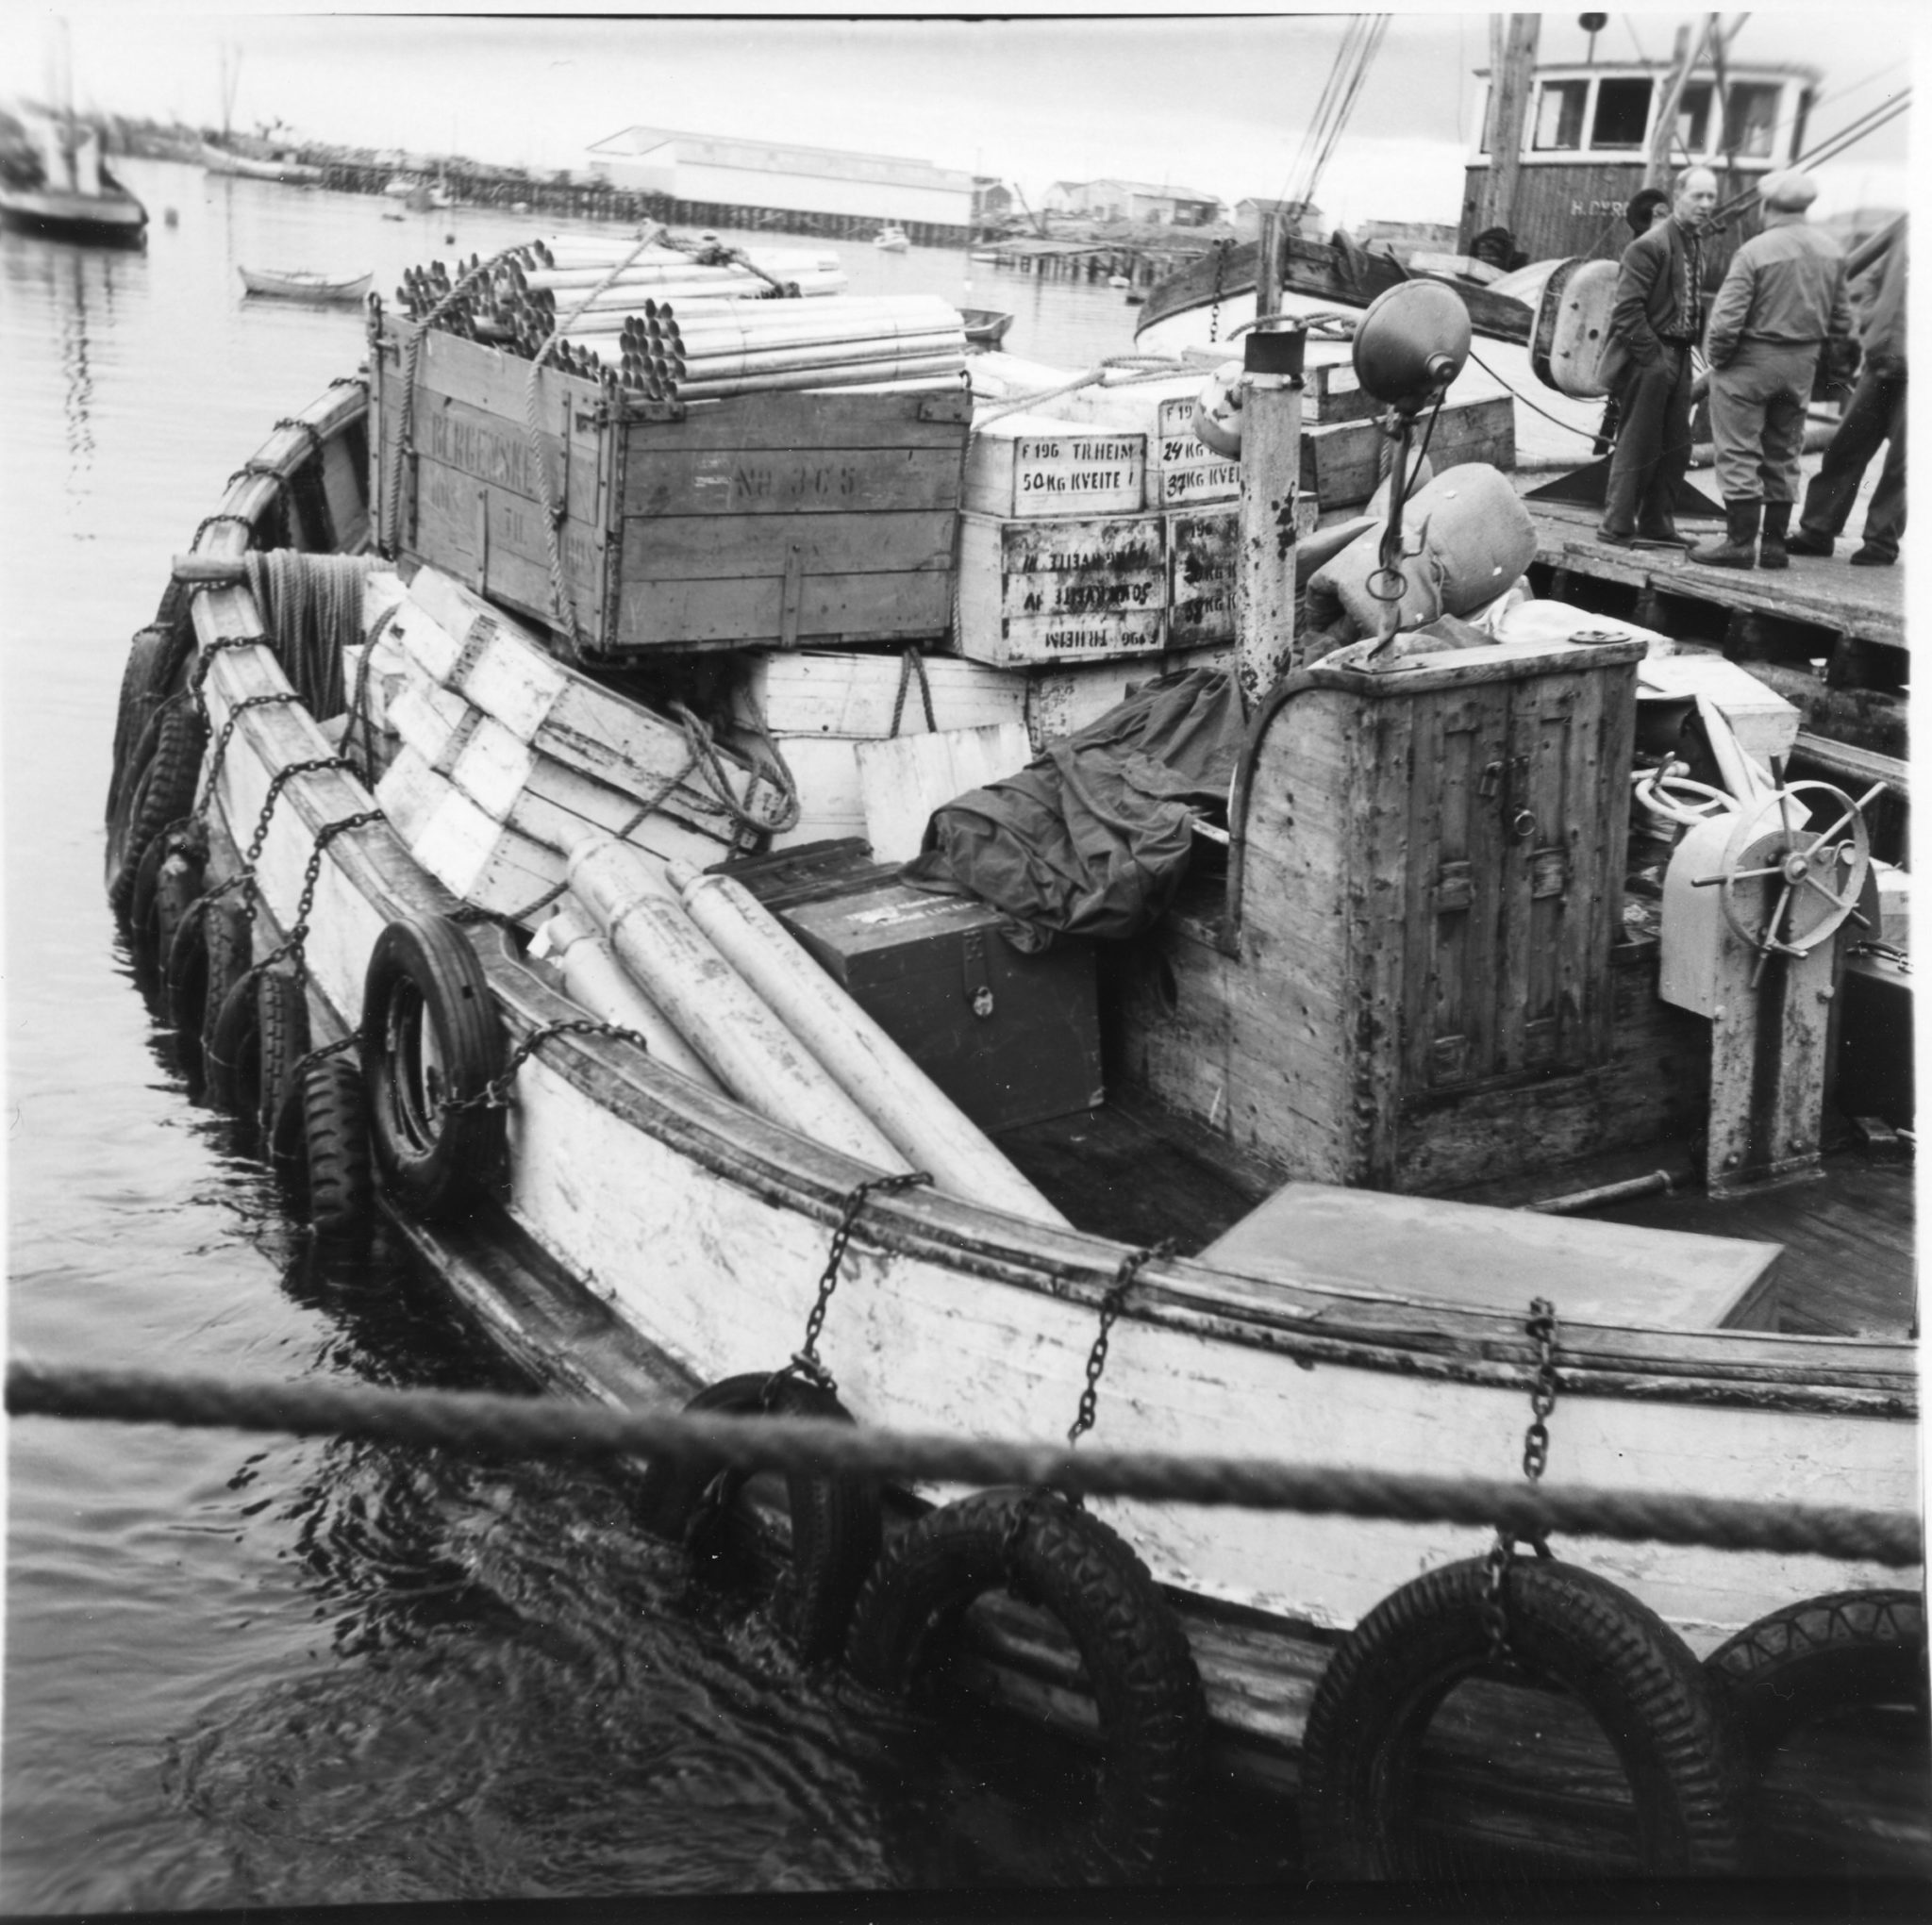 The transport boat, pramma, is fully loaded with goods. There was no road to Berlevåg, so the hurtigruten and the pramma were the only way to get goods to and from Berlevåg © Havnemuseet i Berlevåg